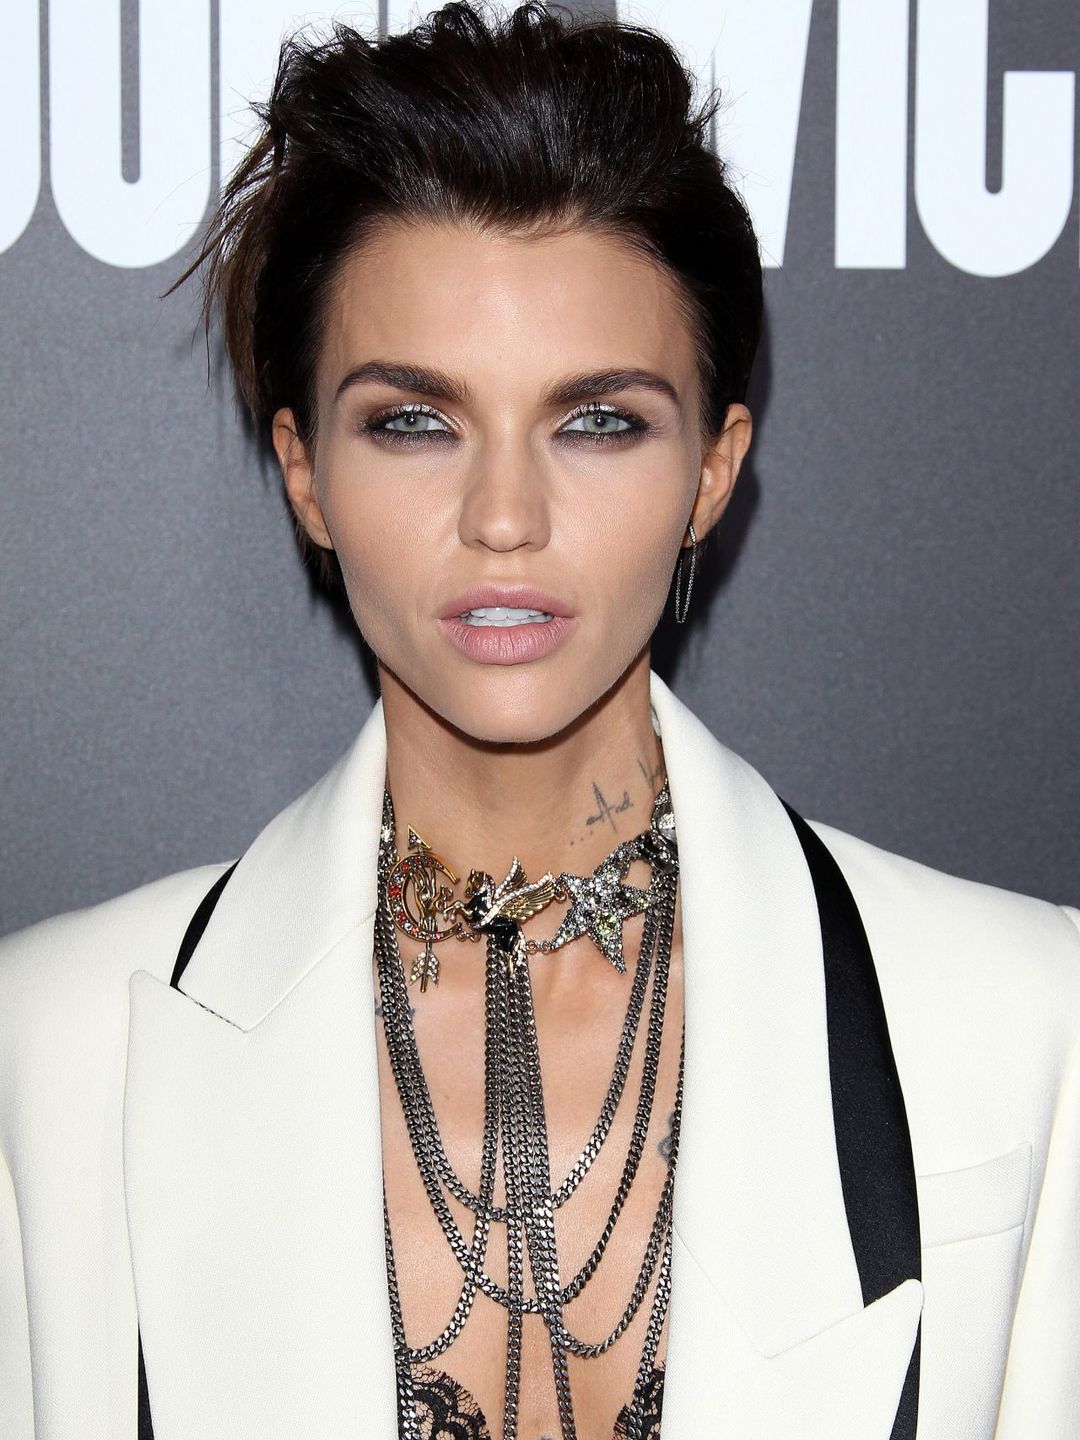 Ruby Rose interesting facts